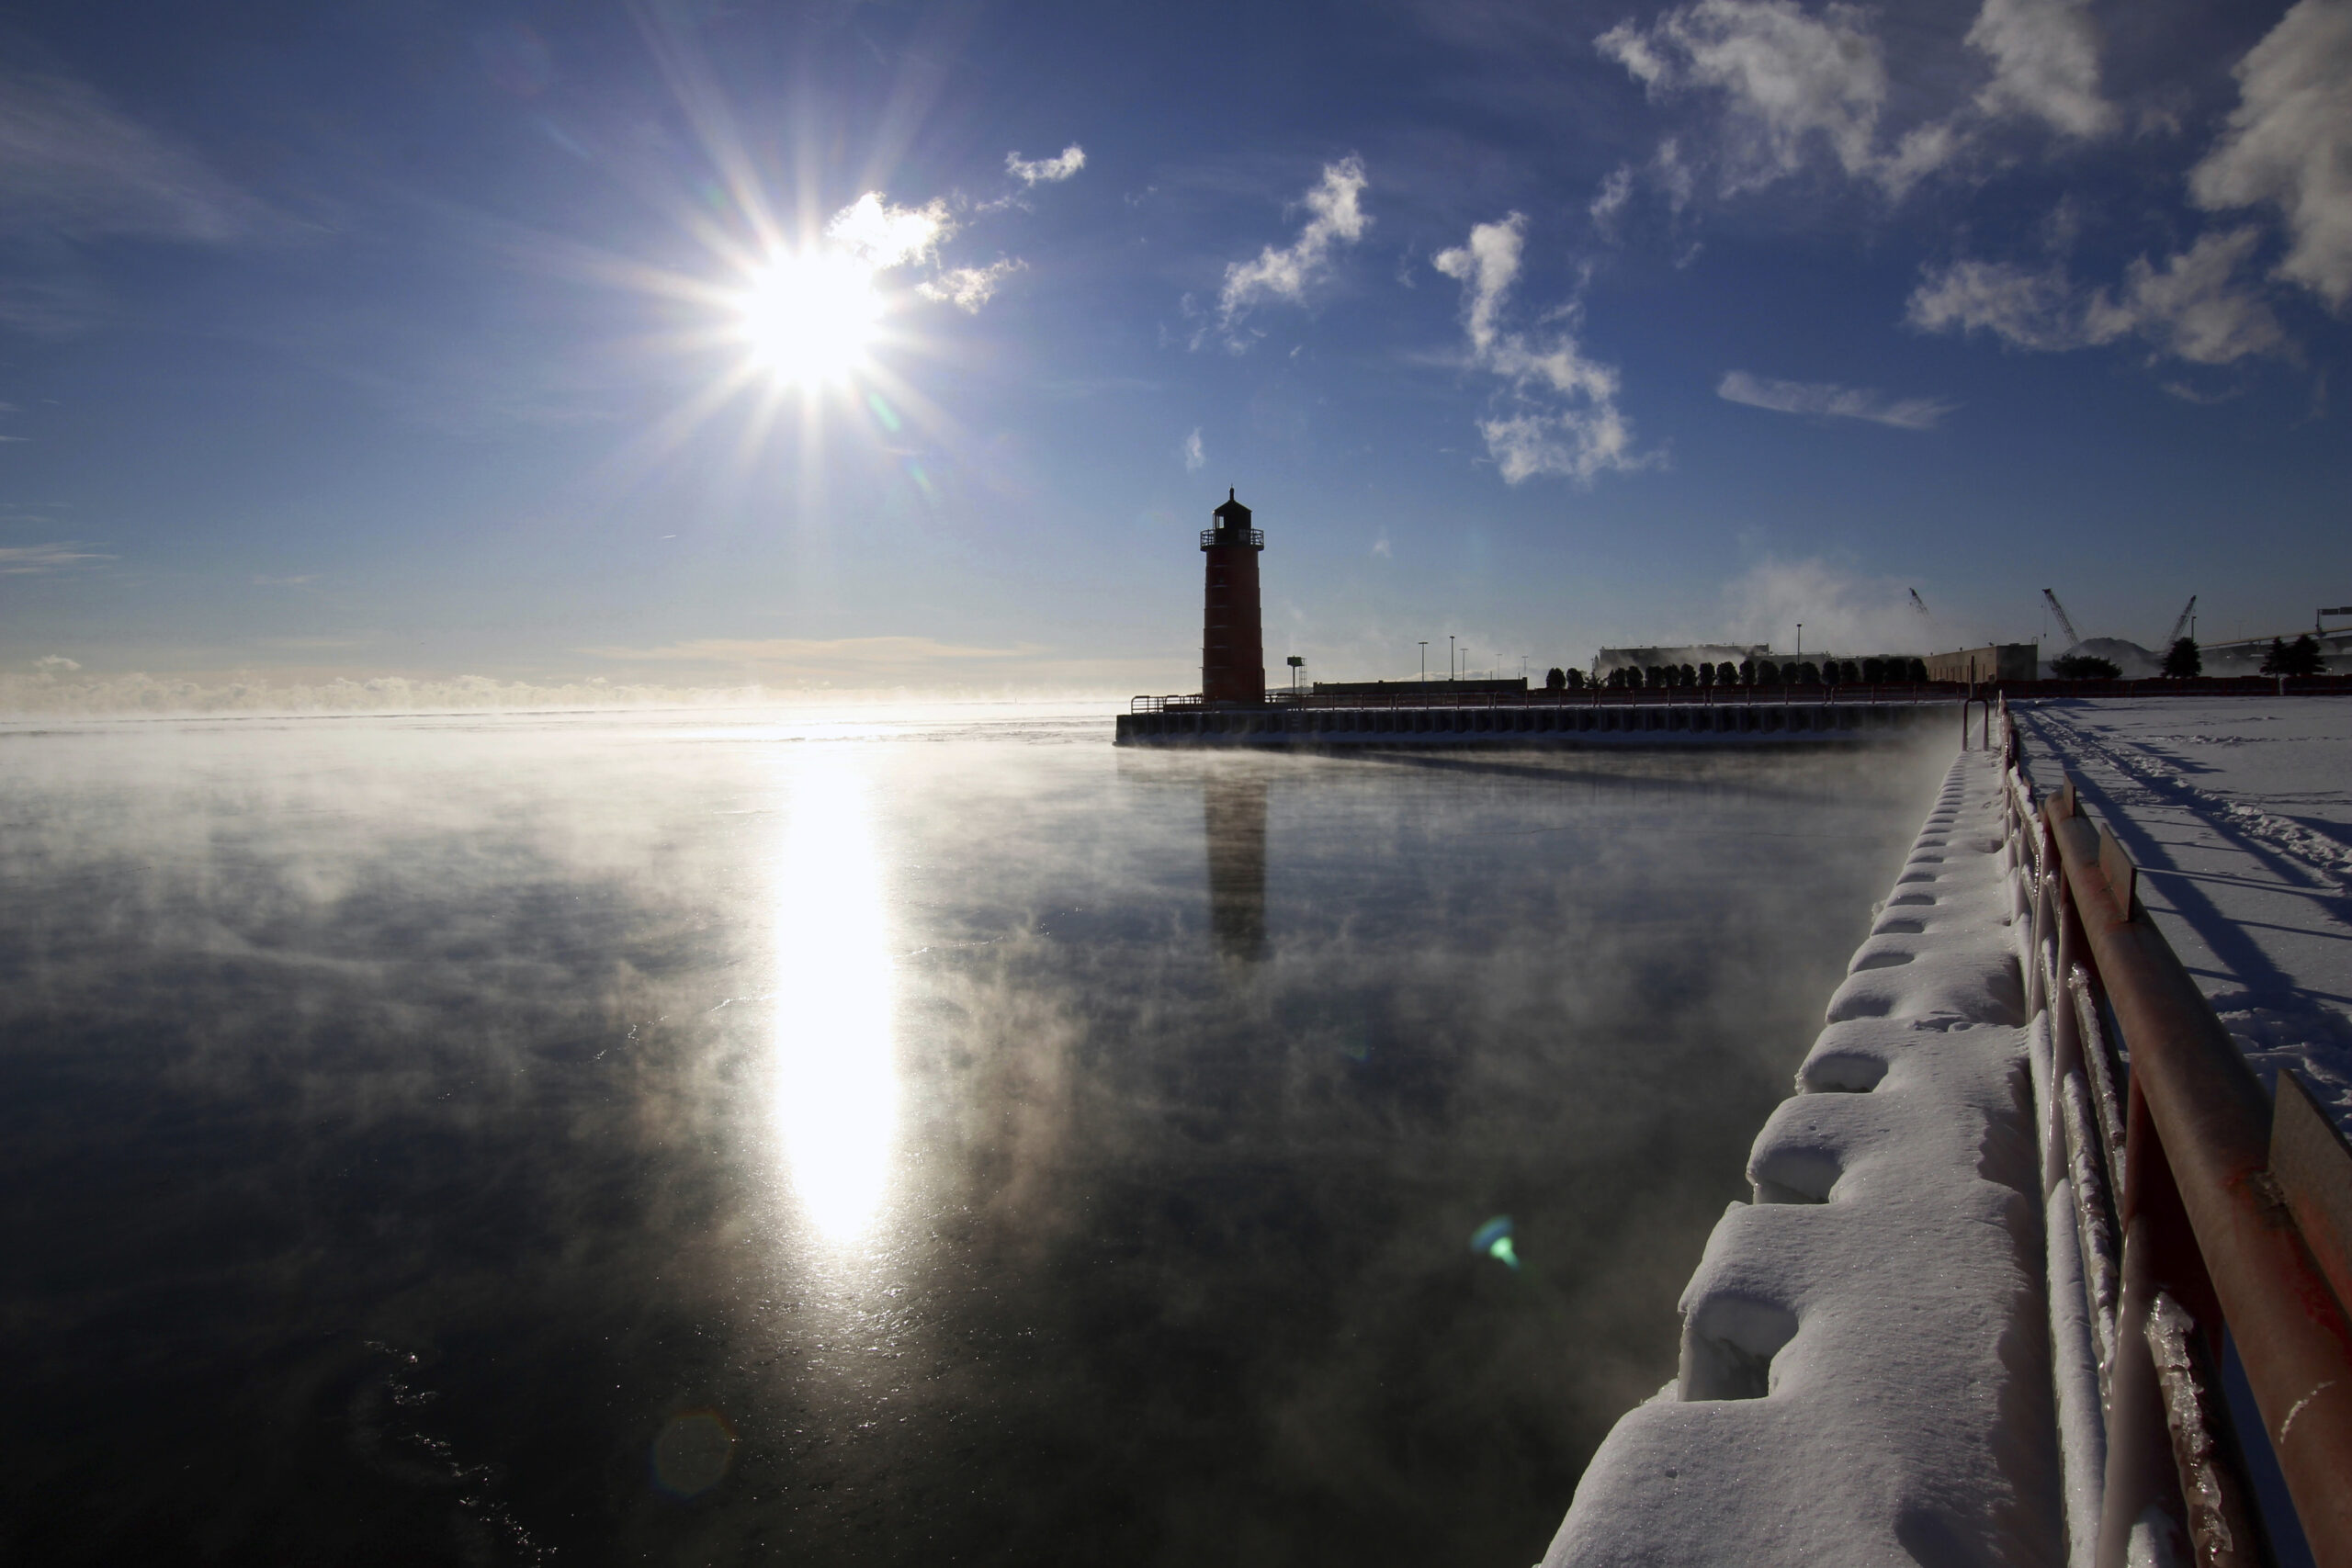 Another cold snap brings sub-zero temperatures to Wisconsin on Tuesday and Wednesday